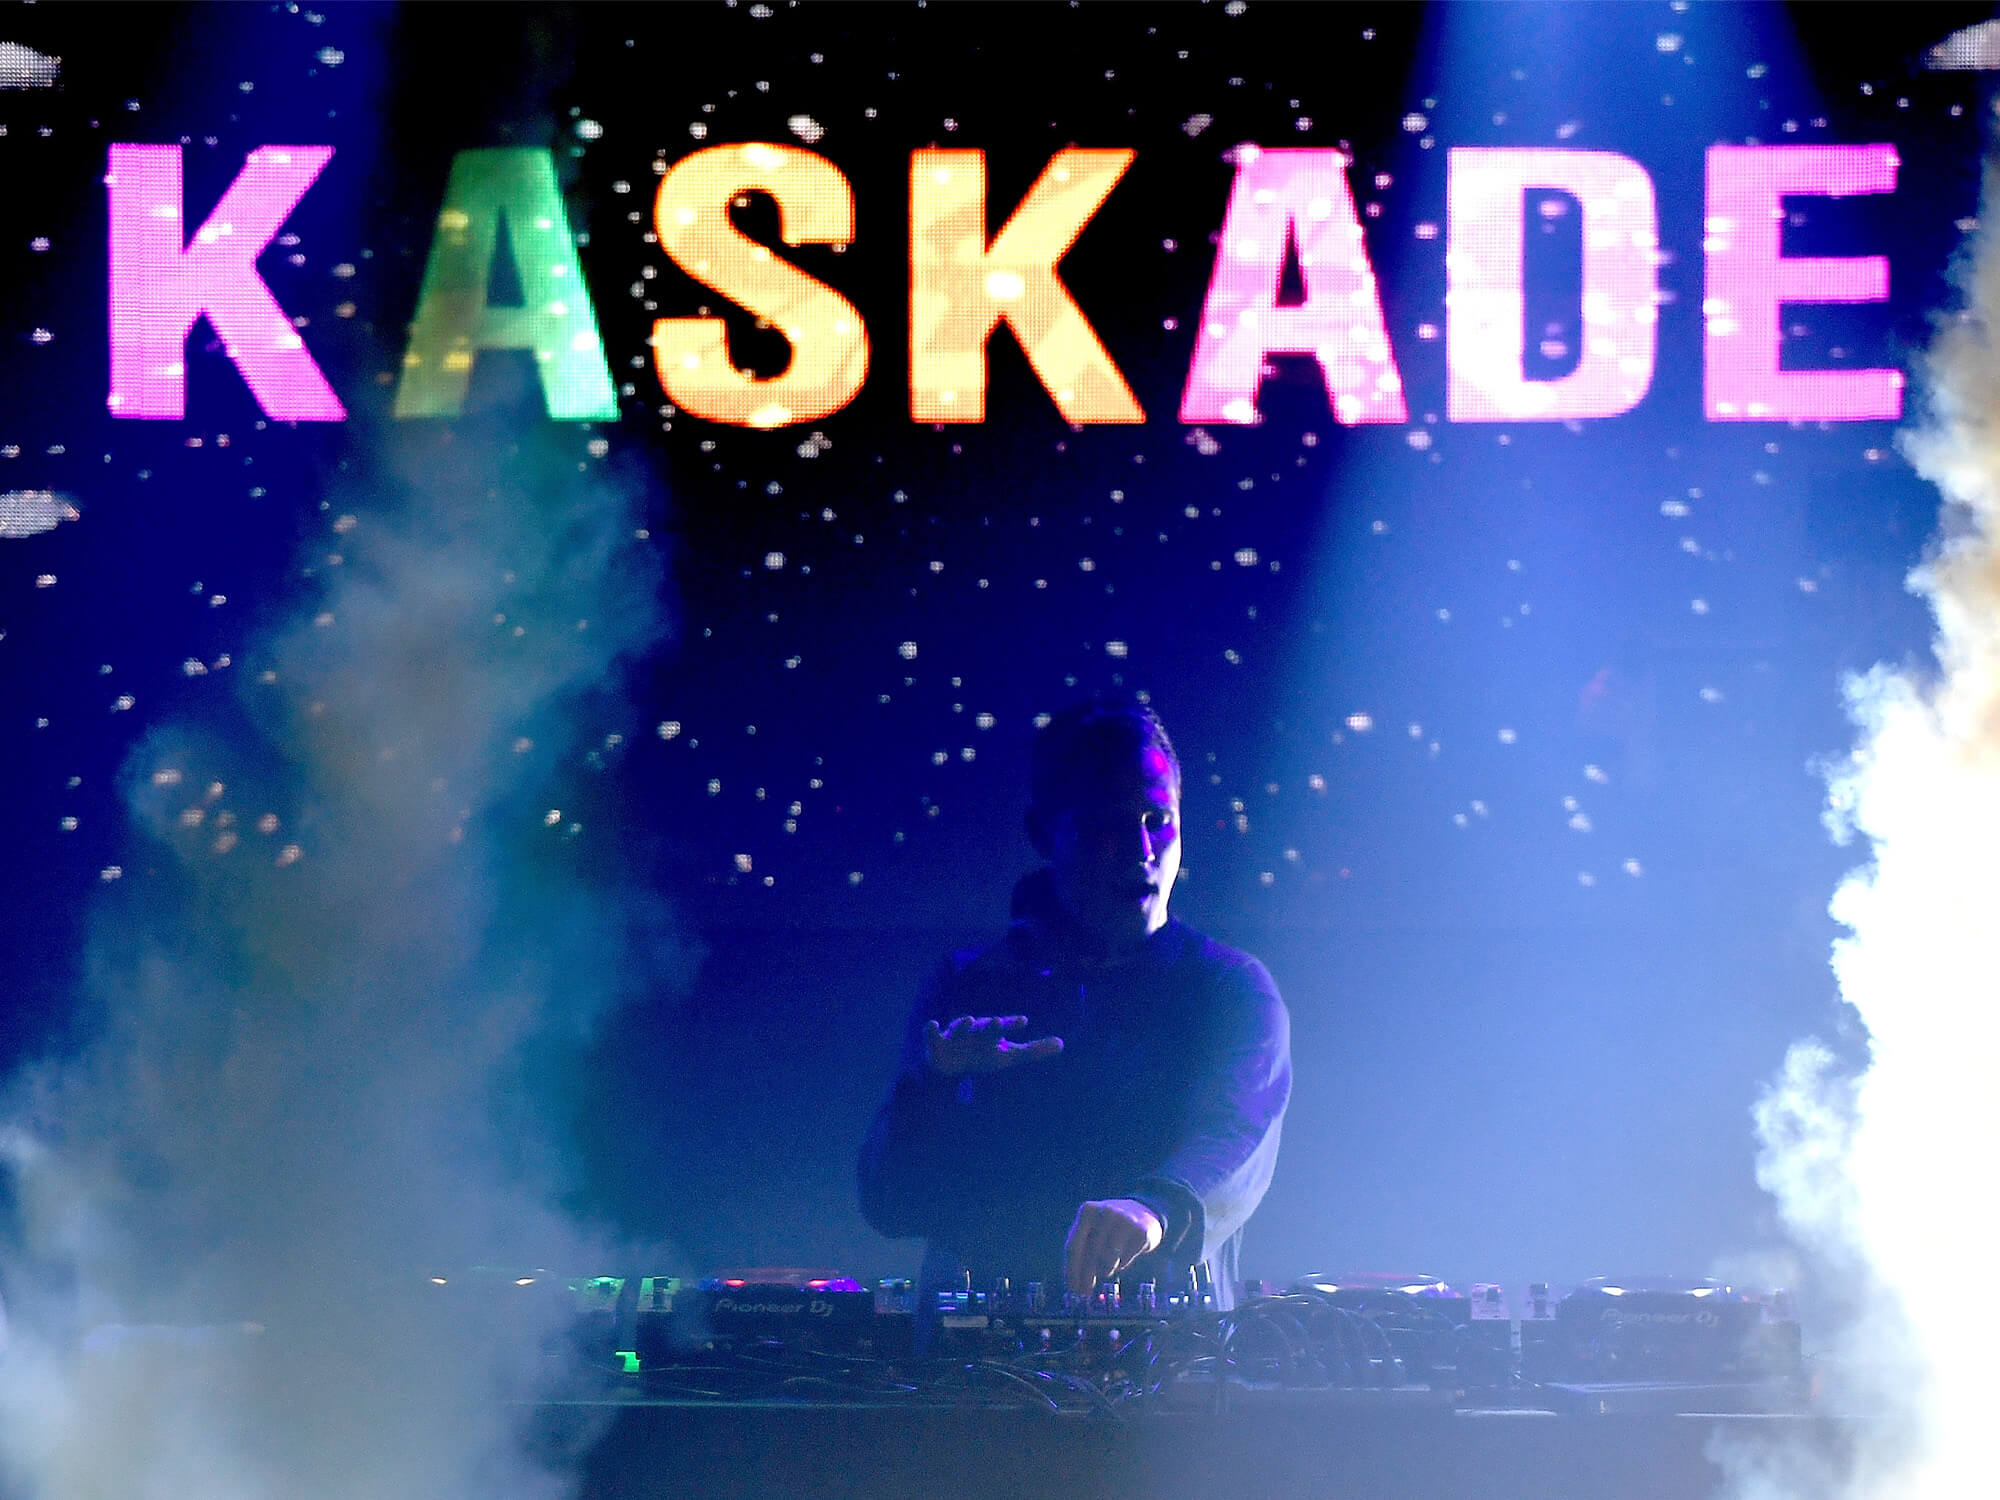 Kaskade on stage. His name is lit up in multicoloured letters, and he has on hand on a control knob on his deck.